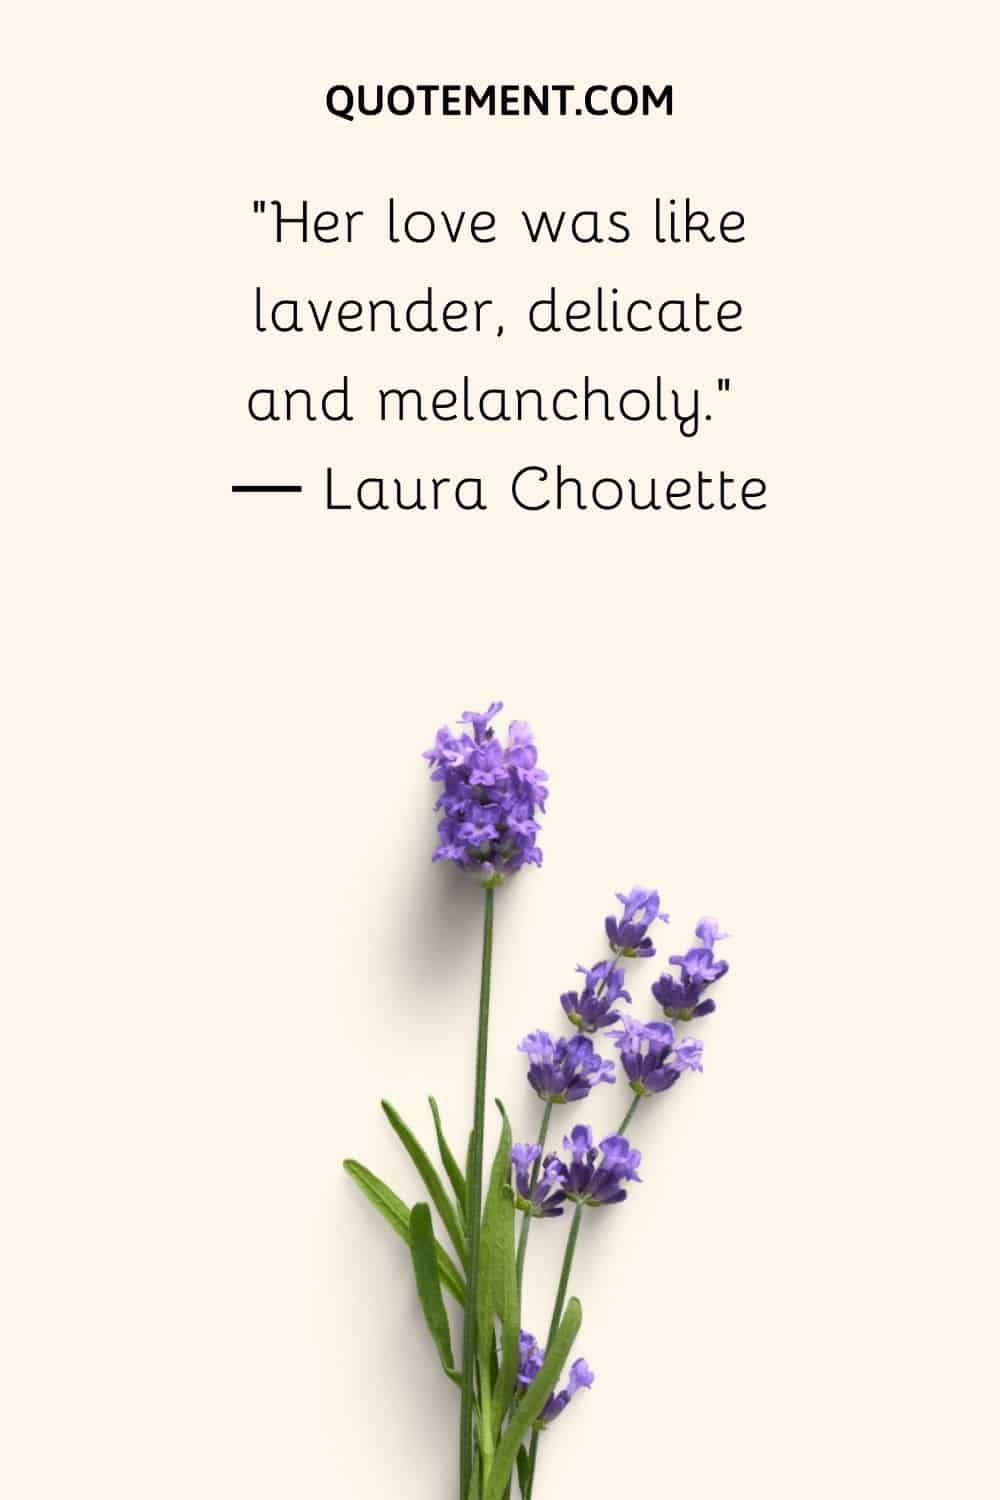 Her love was like lavender, delicate and melancholy